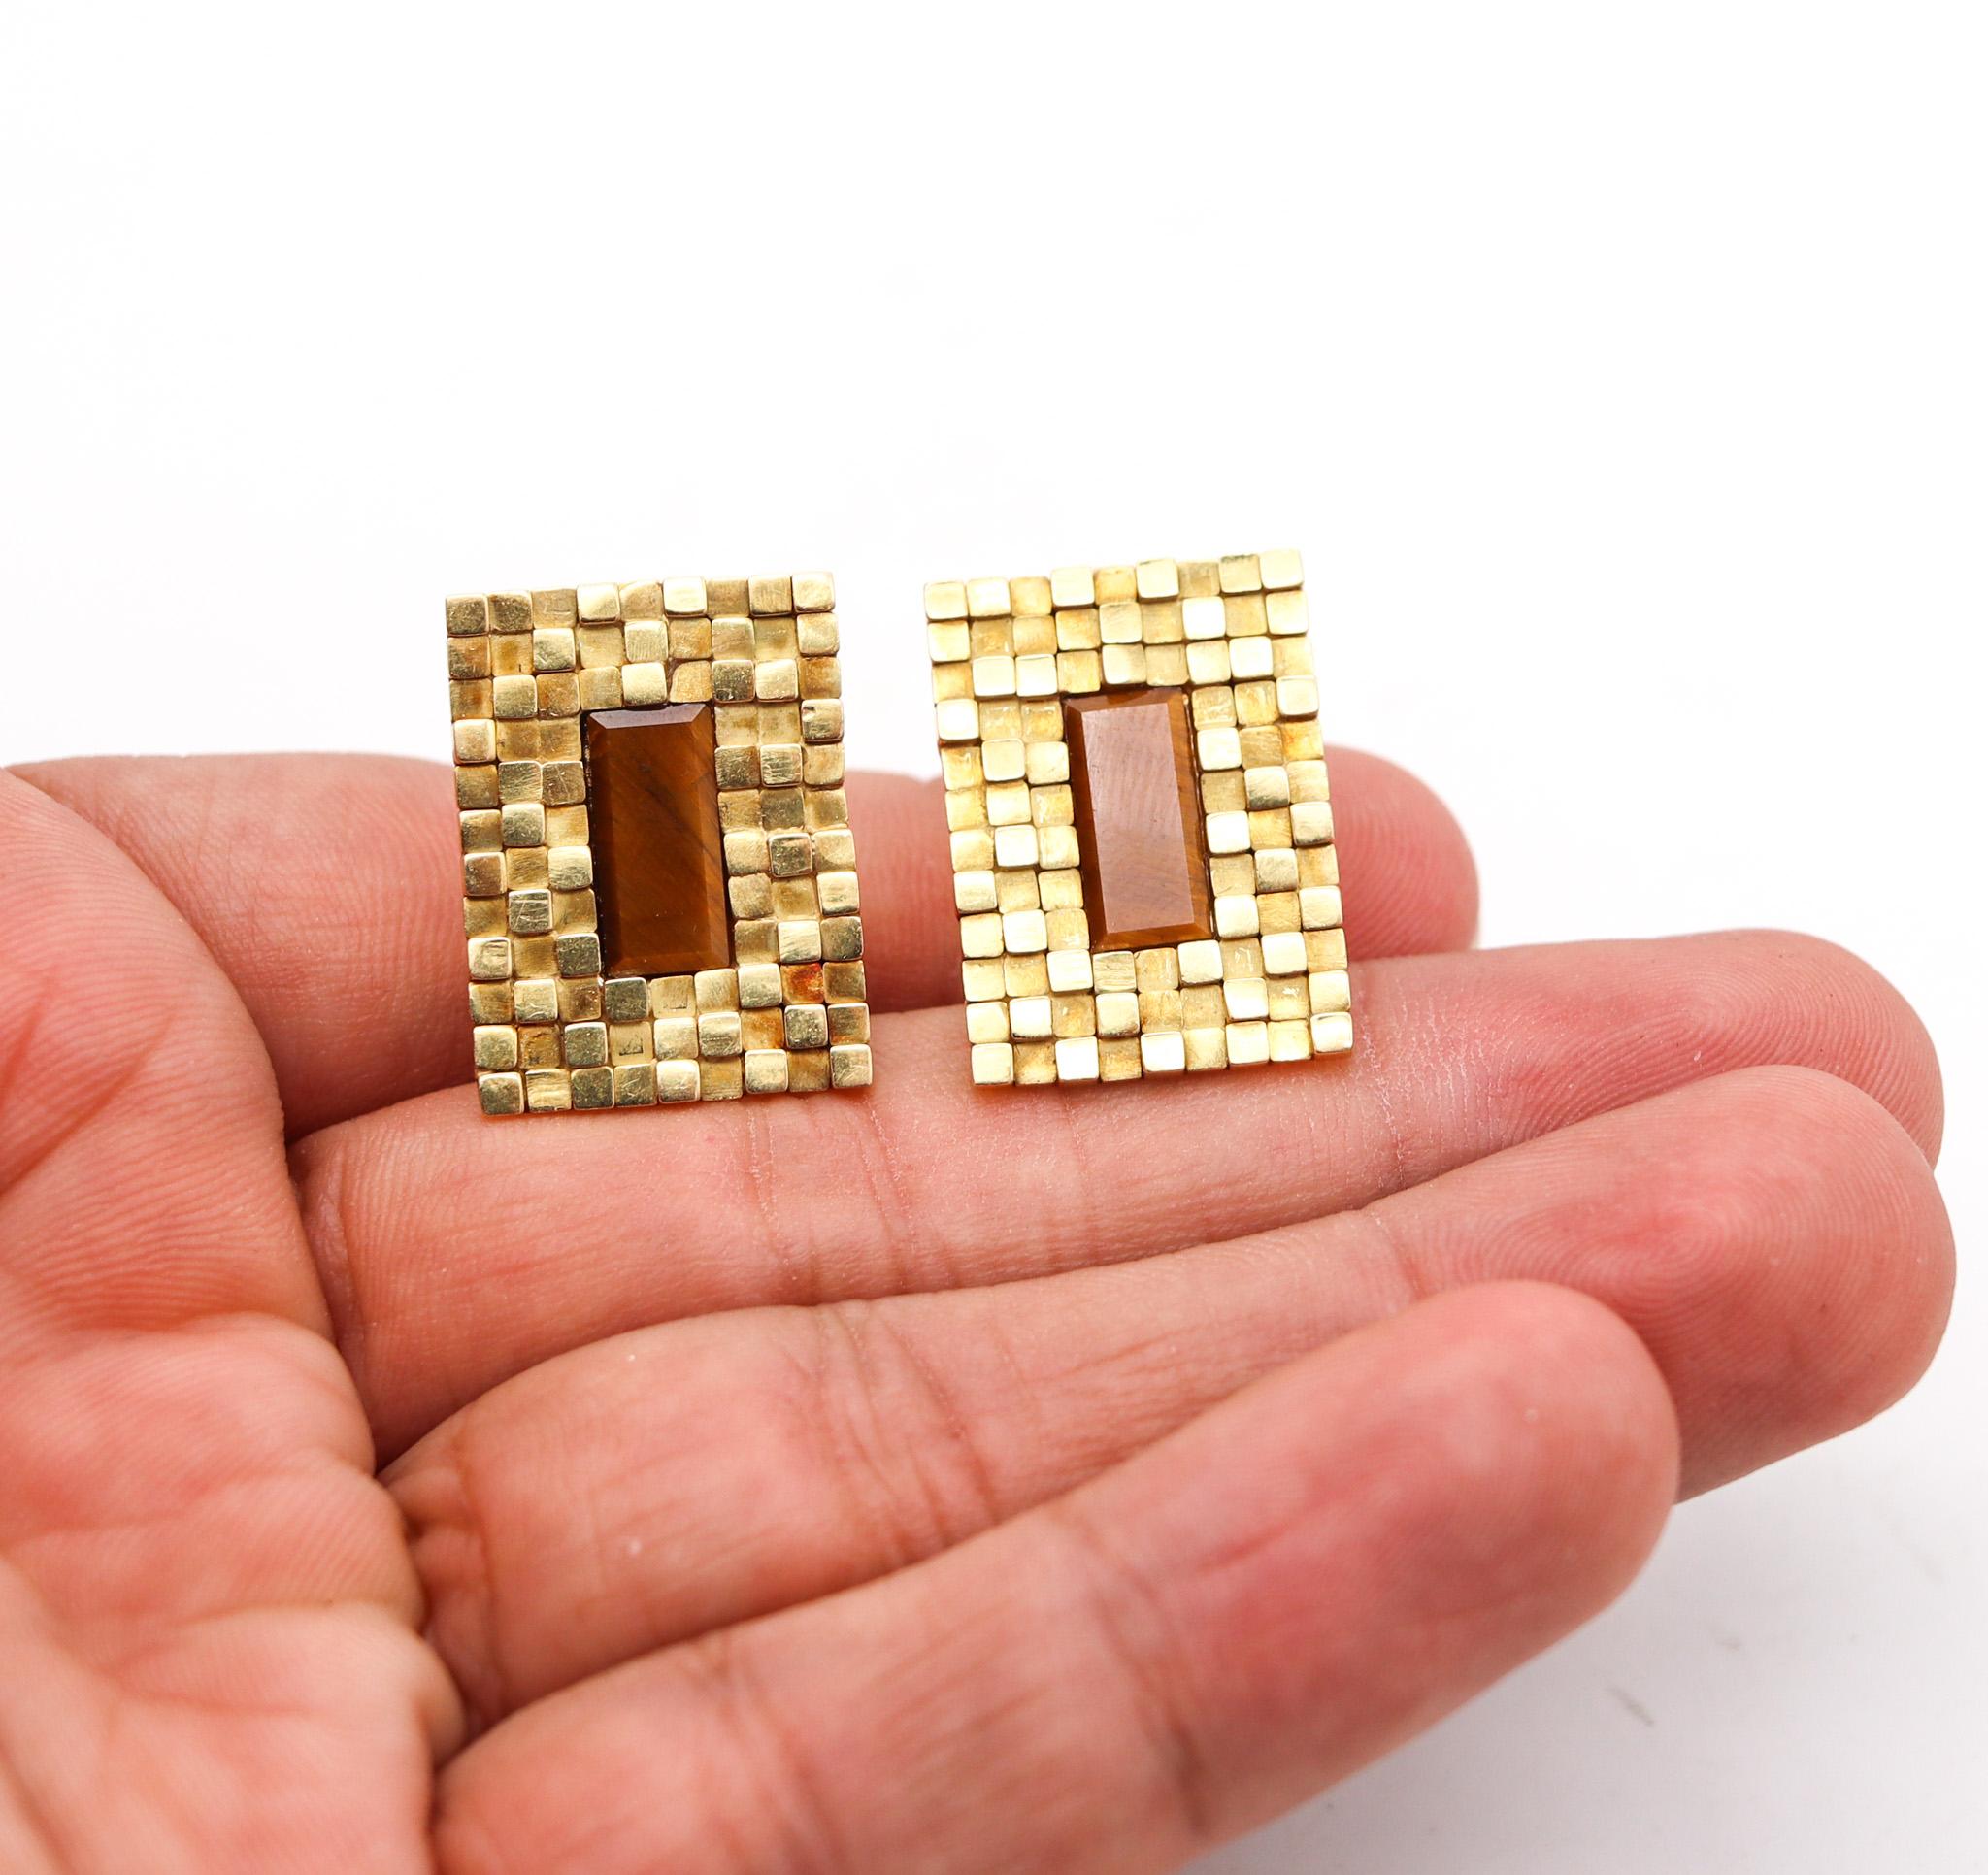 Spritzer & Furhmann 1960 Modernist Geometric Earrings 18Kt Gold With Tiger's Eye In Excellent Condition For Sale In Miami, FL